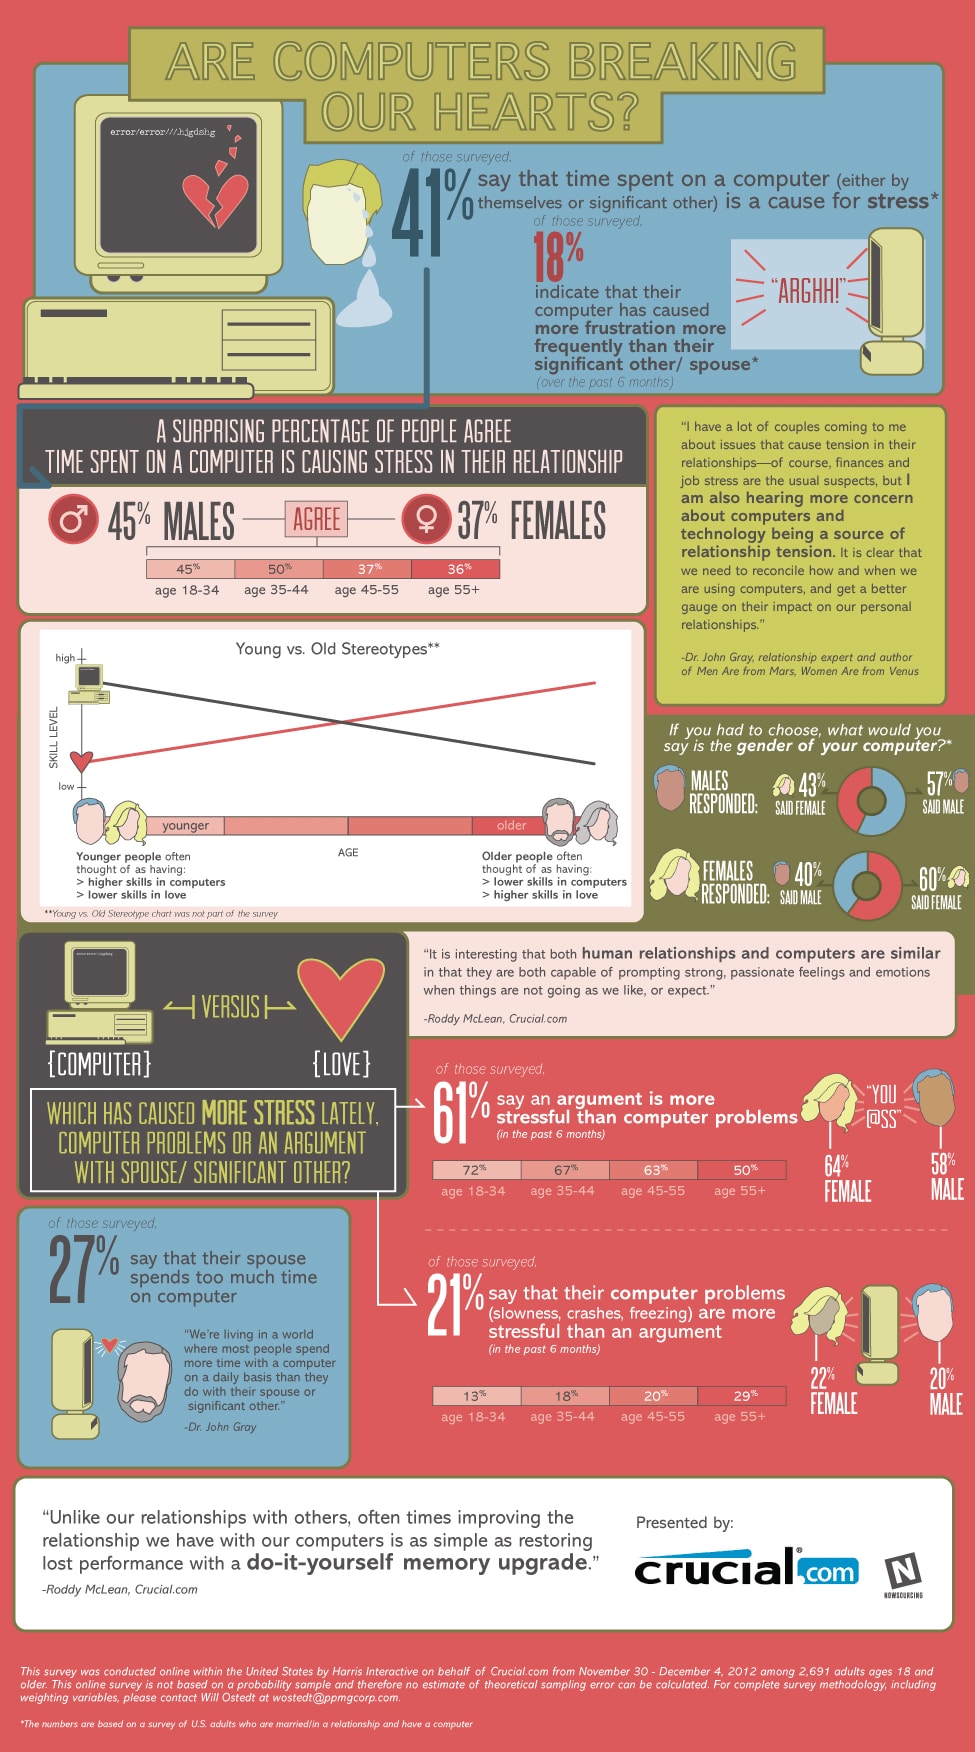 Computer Stress Is Worse Than Relationship Stress [Infographic]